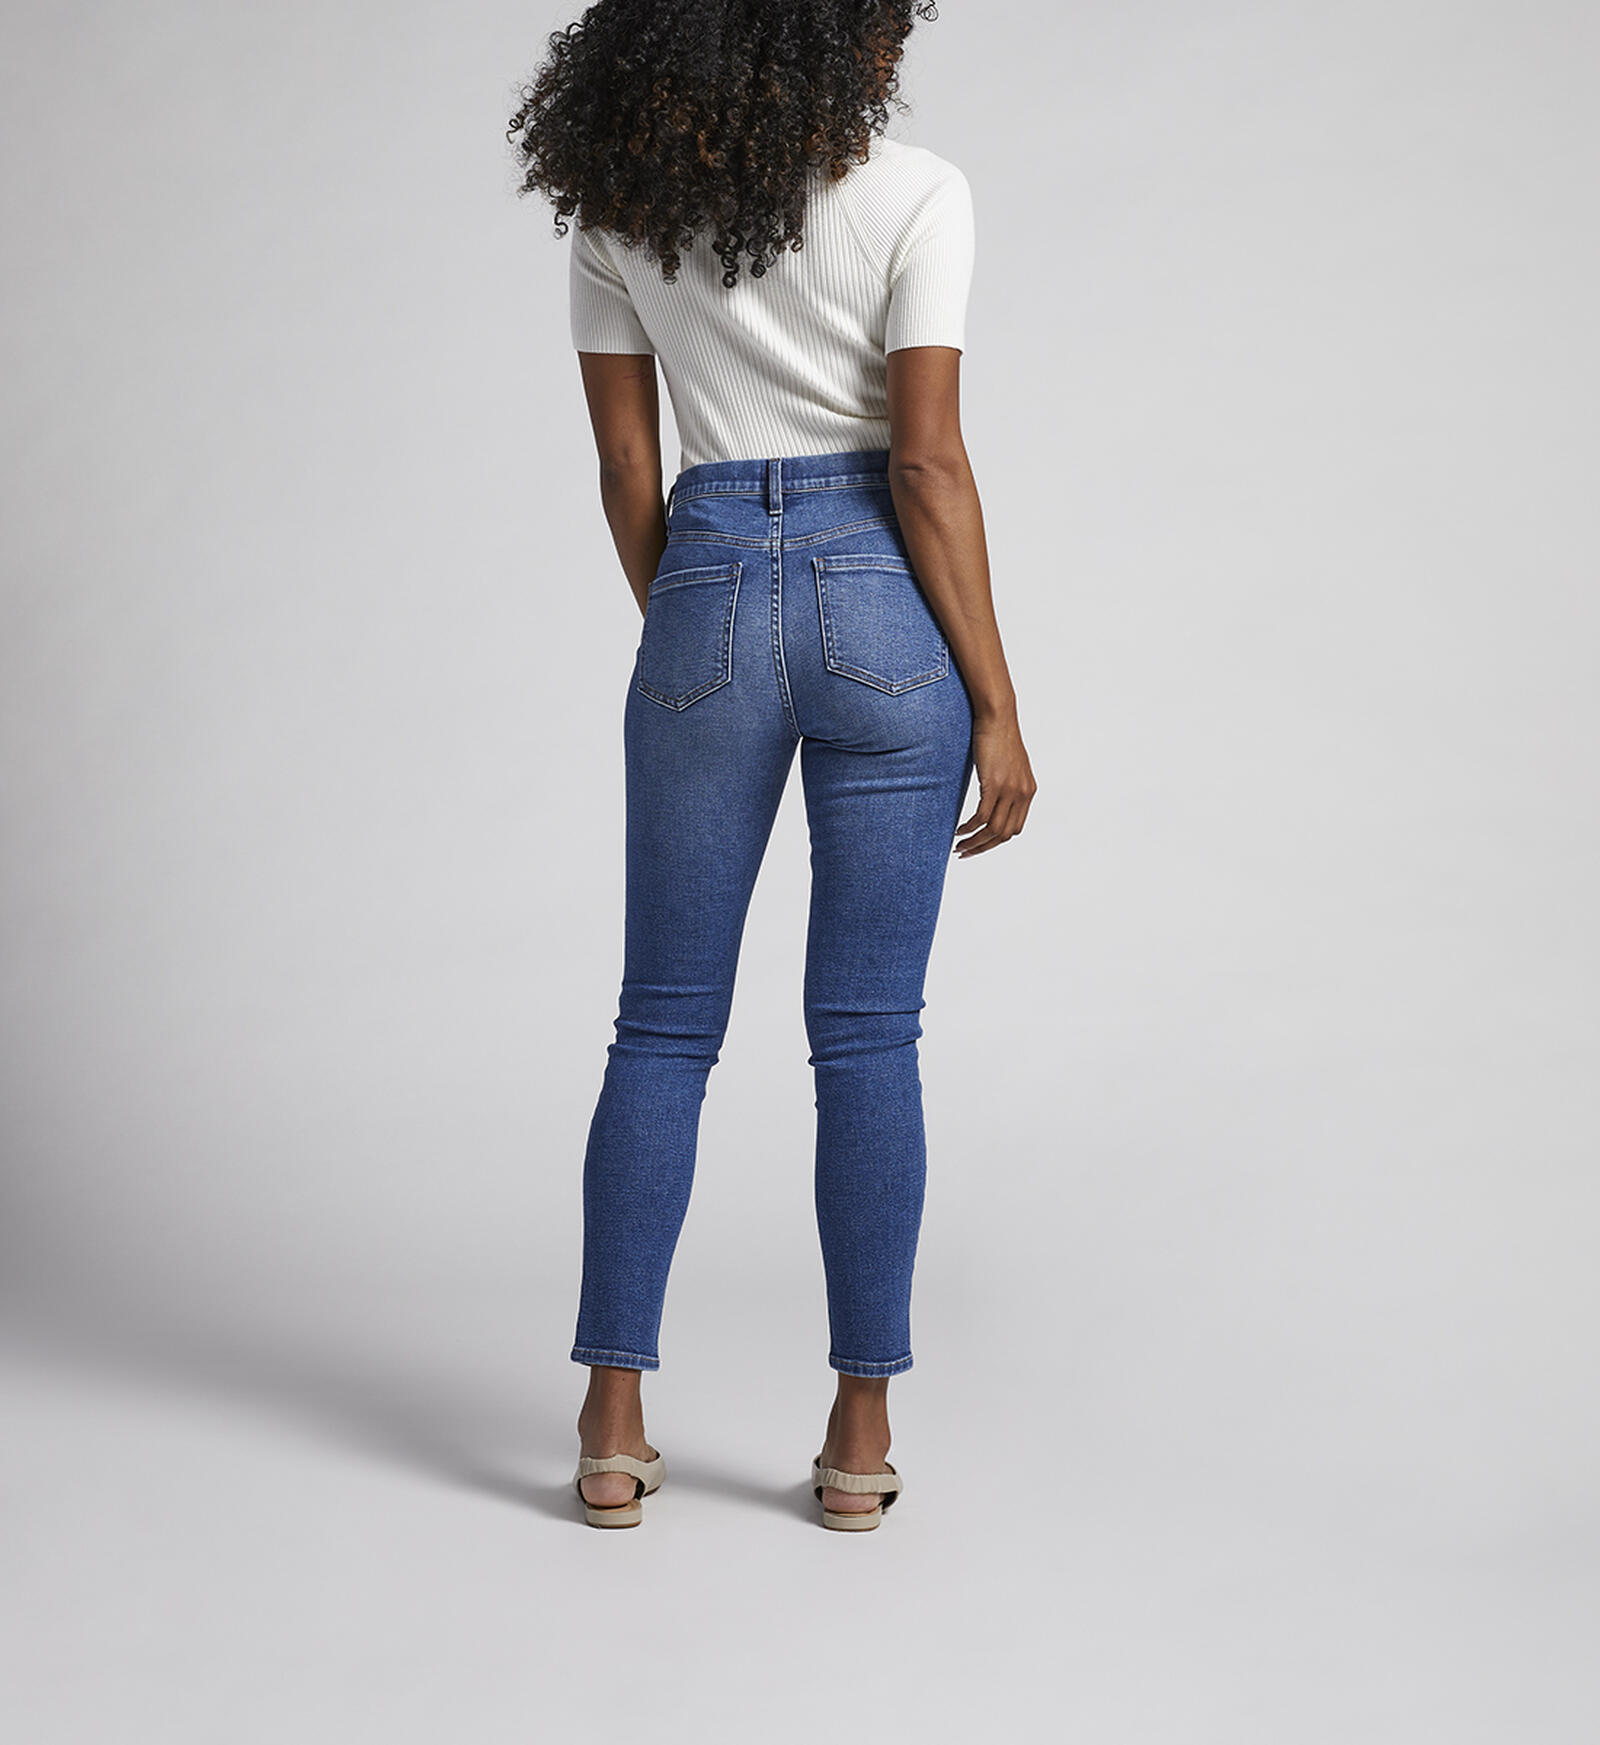 Buy Valentina High Rise Skinny Pull-On Jeans for USD 78.00 | Jag Jeans ...